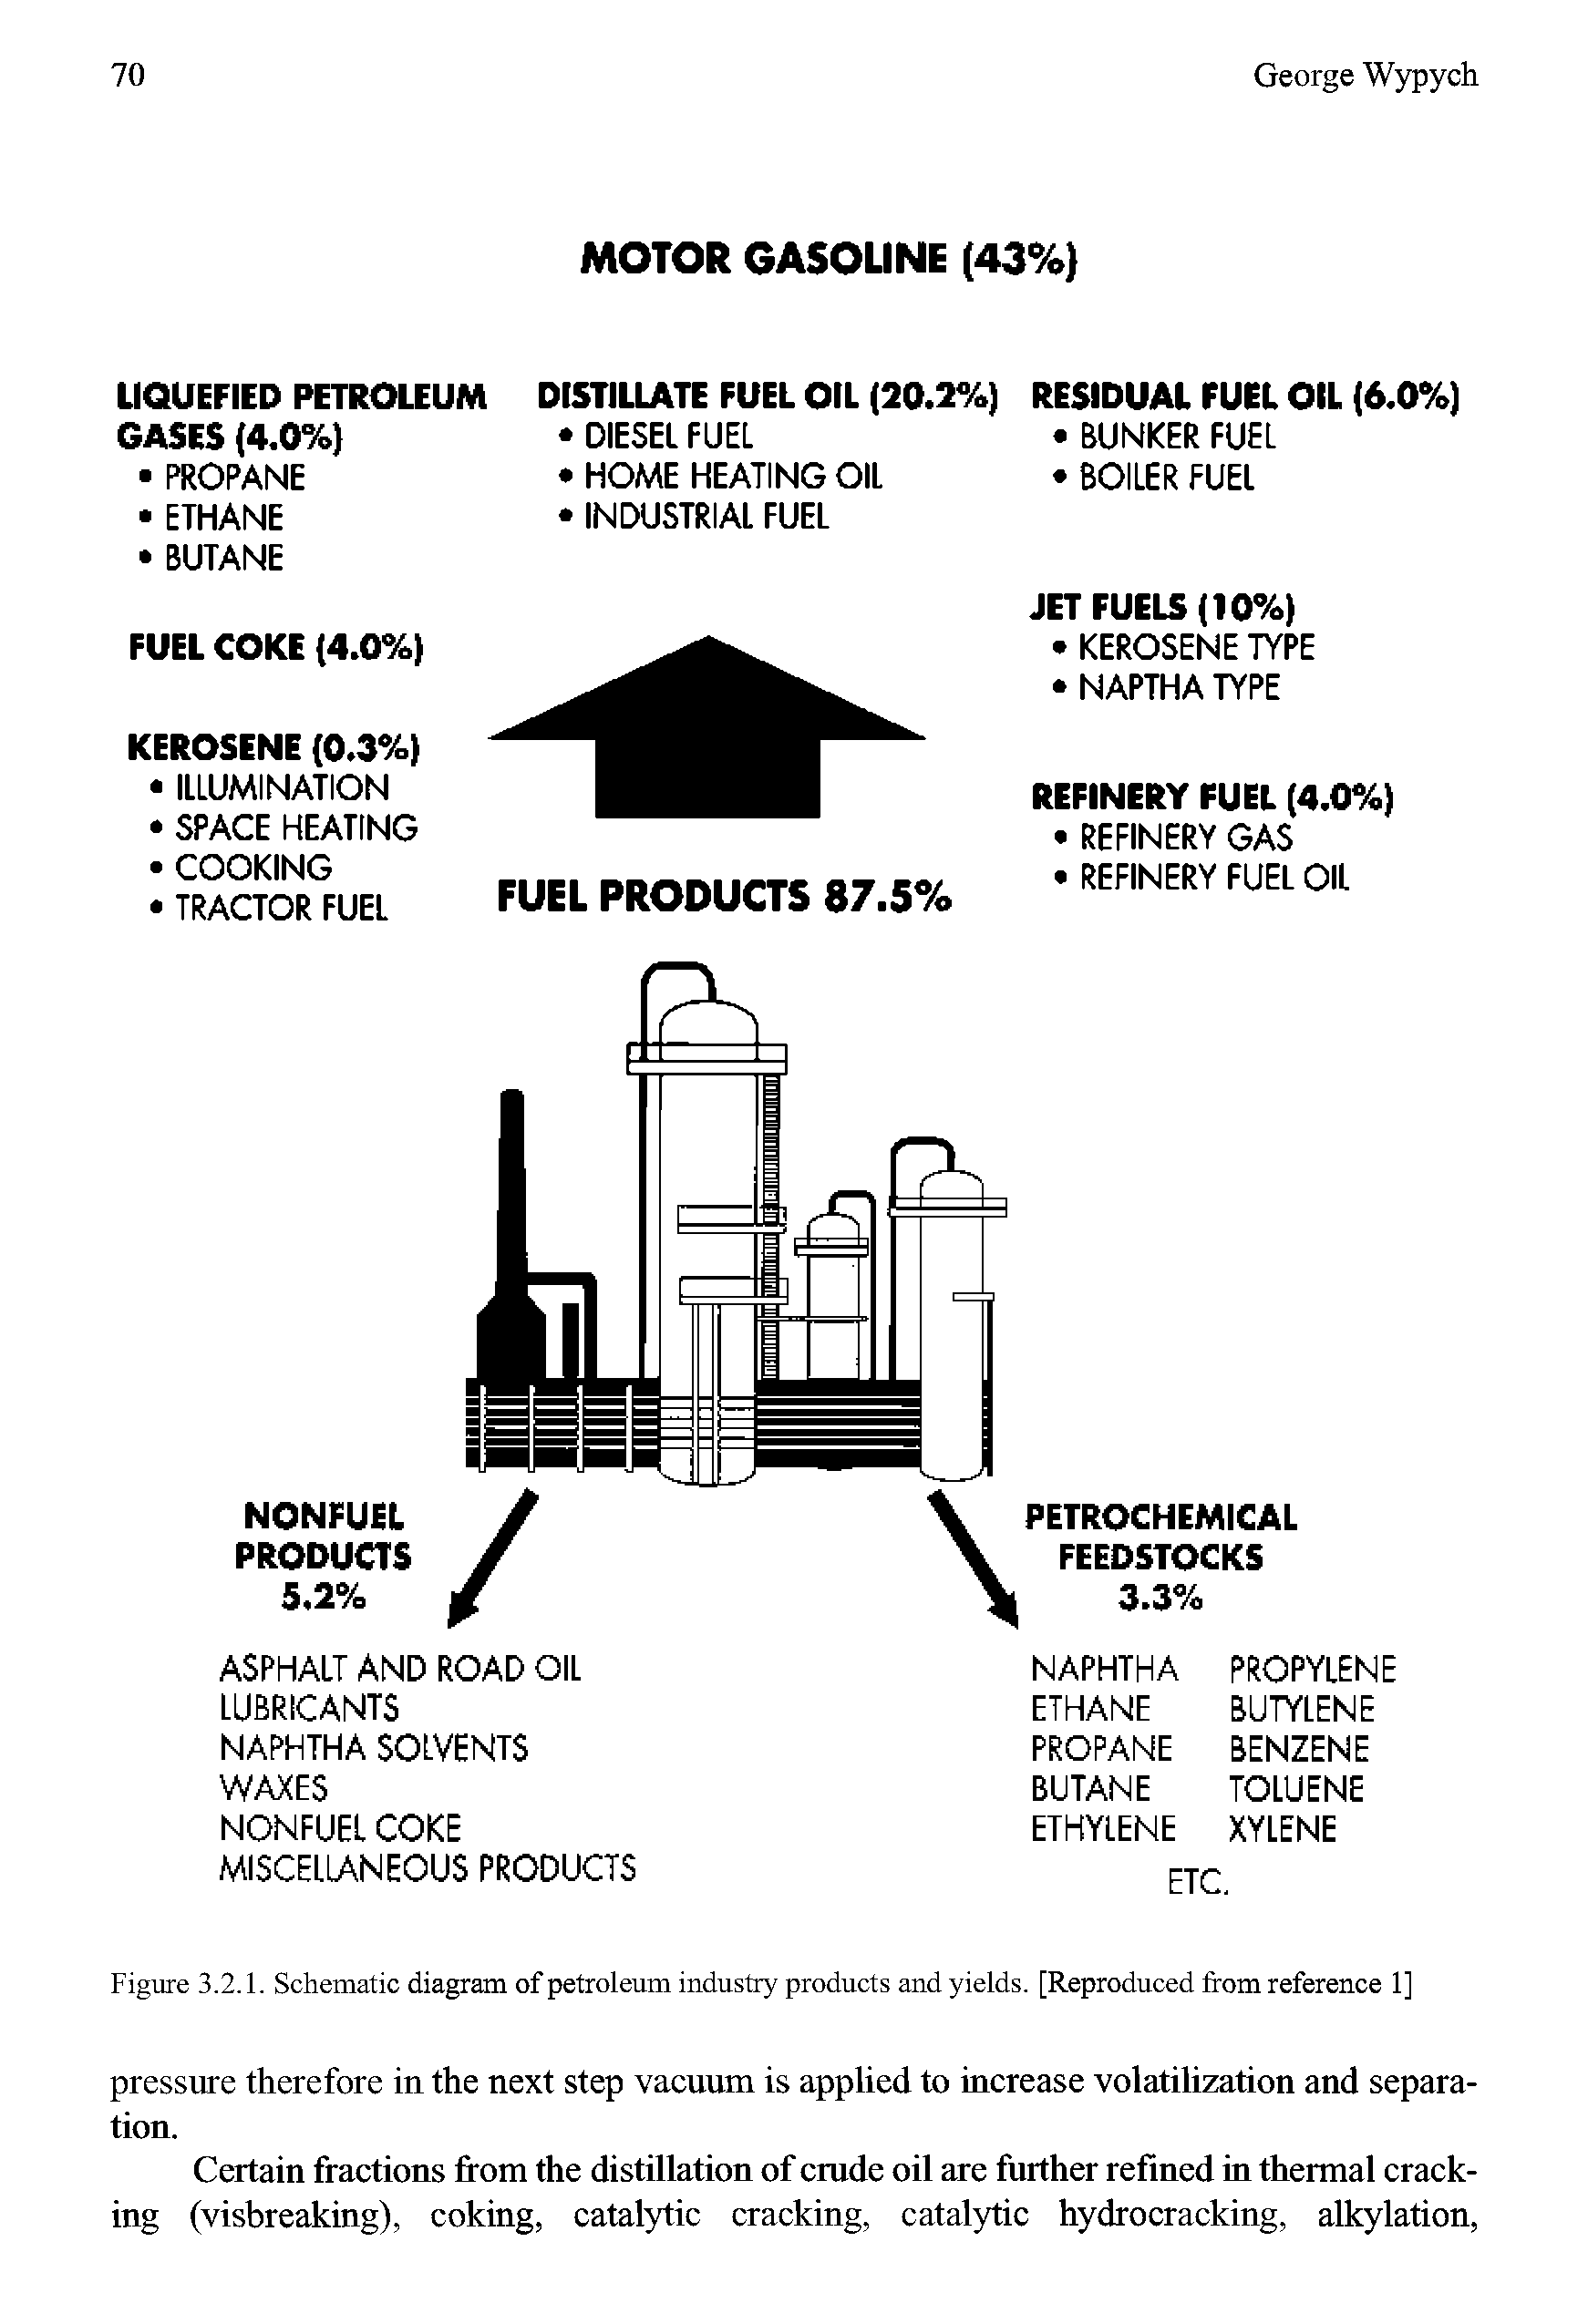 Figure 3.2.1. Schematic diagram of petroleum industry products and yields. [Reproduced from reference 1]...